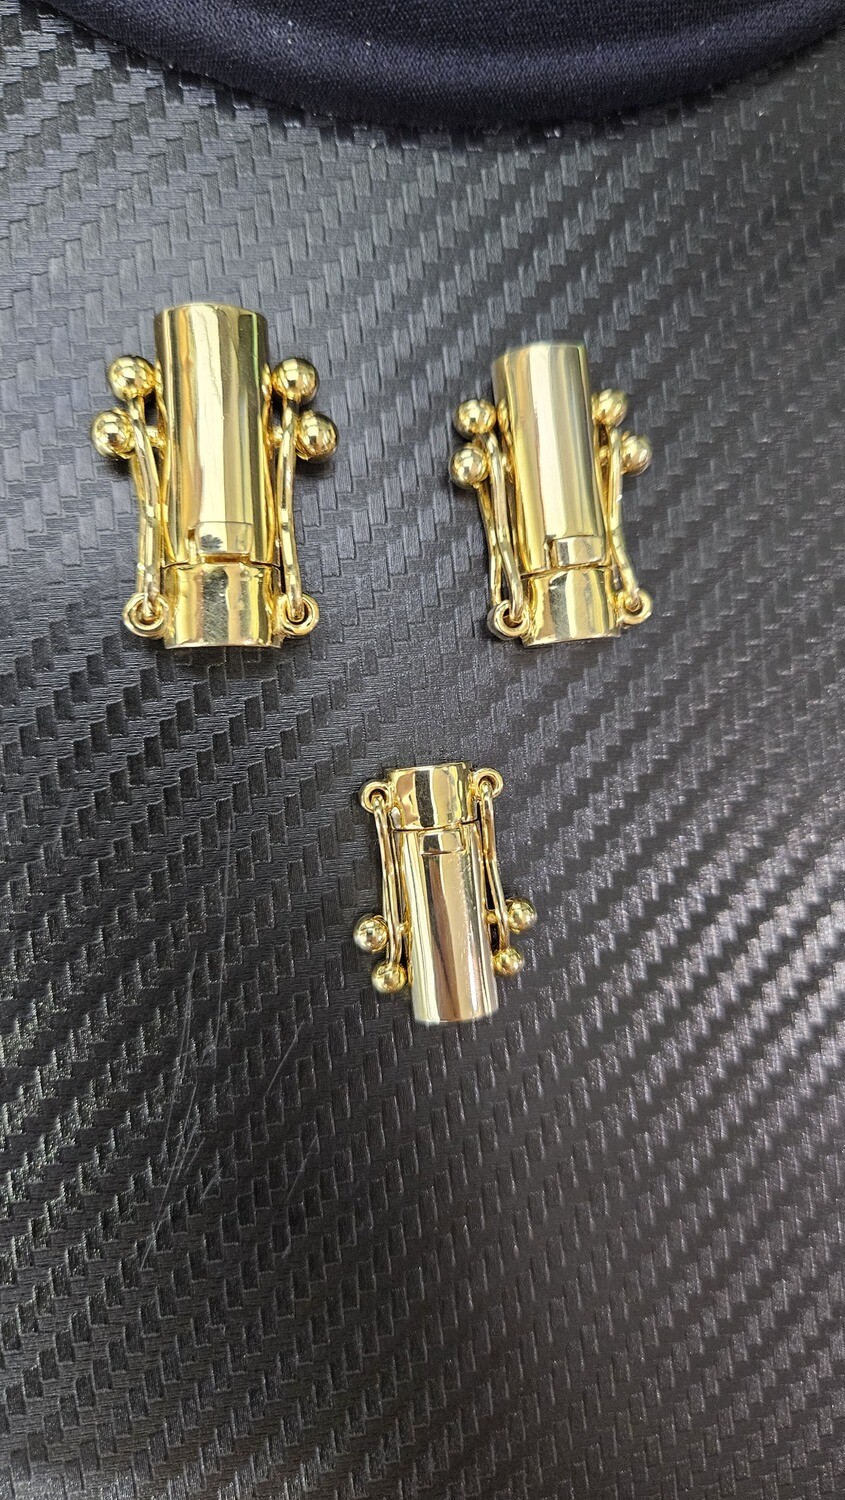 14K OVAL BARREL LOCKS, 4 WEEKS TO MANUFACTURE IF NOT IN STOCK: 14K 7.7MM OVAL LOCK 16.25 GRAMS